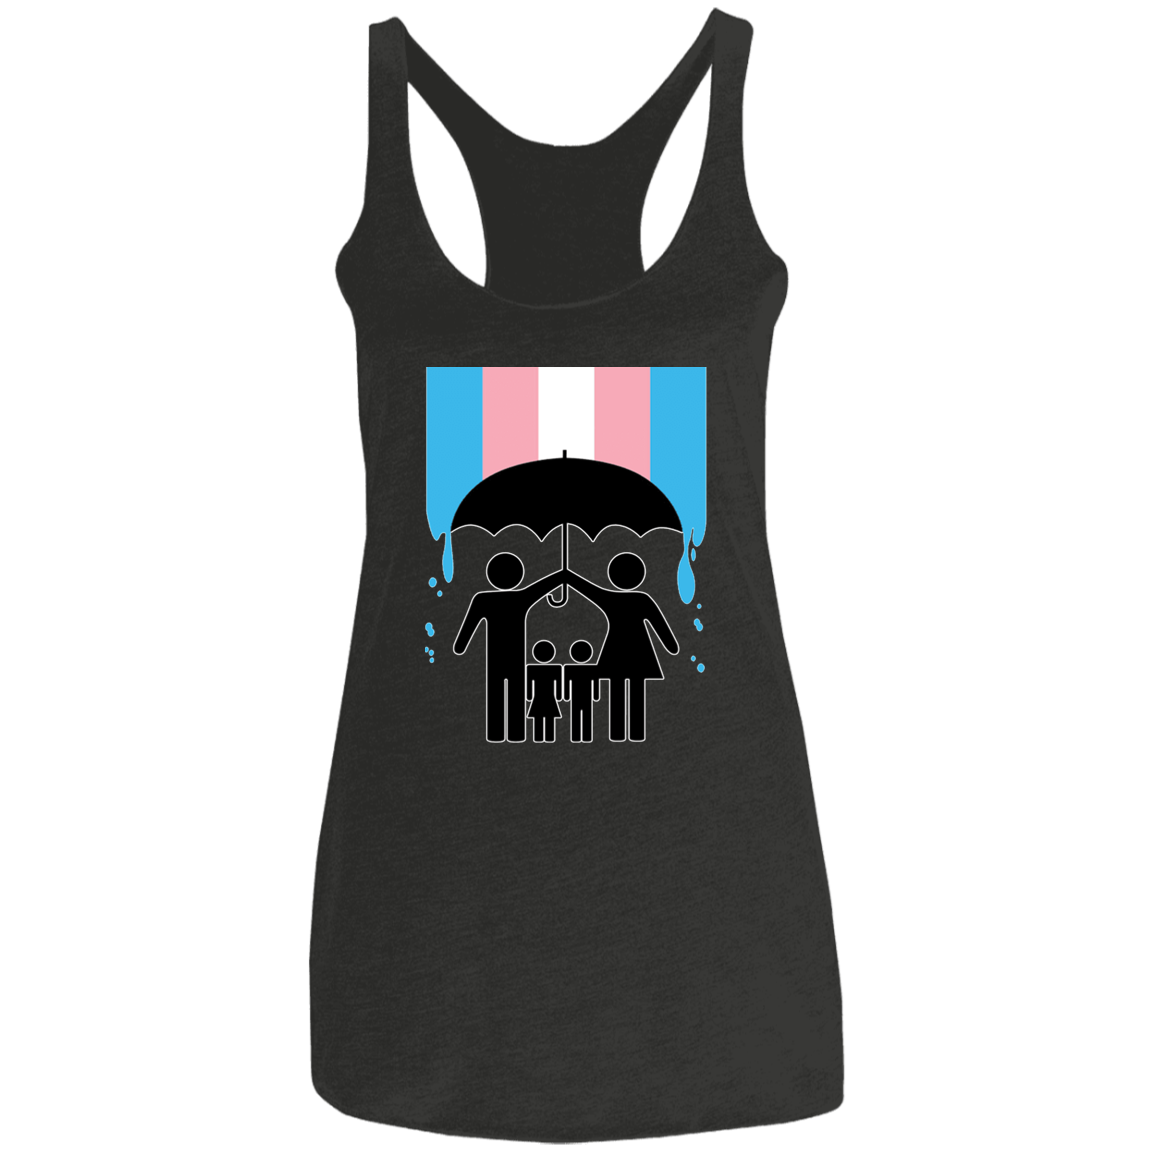 "Protect Family" Ladies' Triblend Racerback Tank